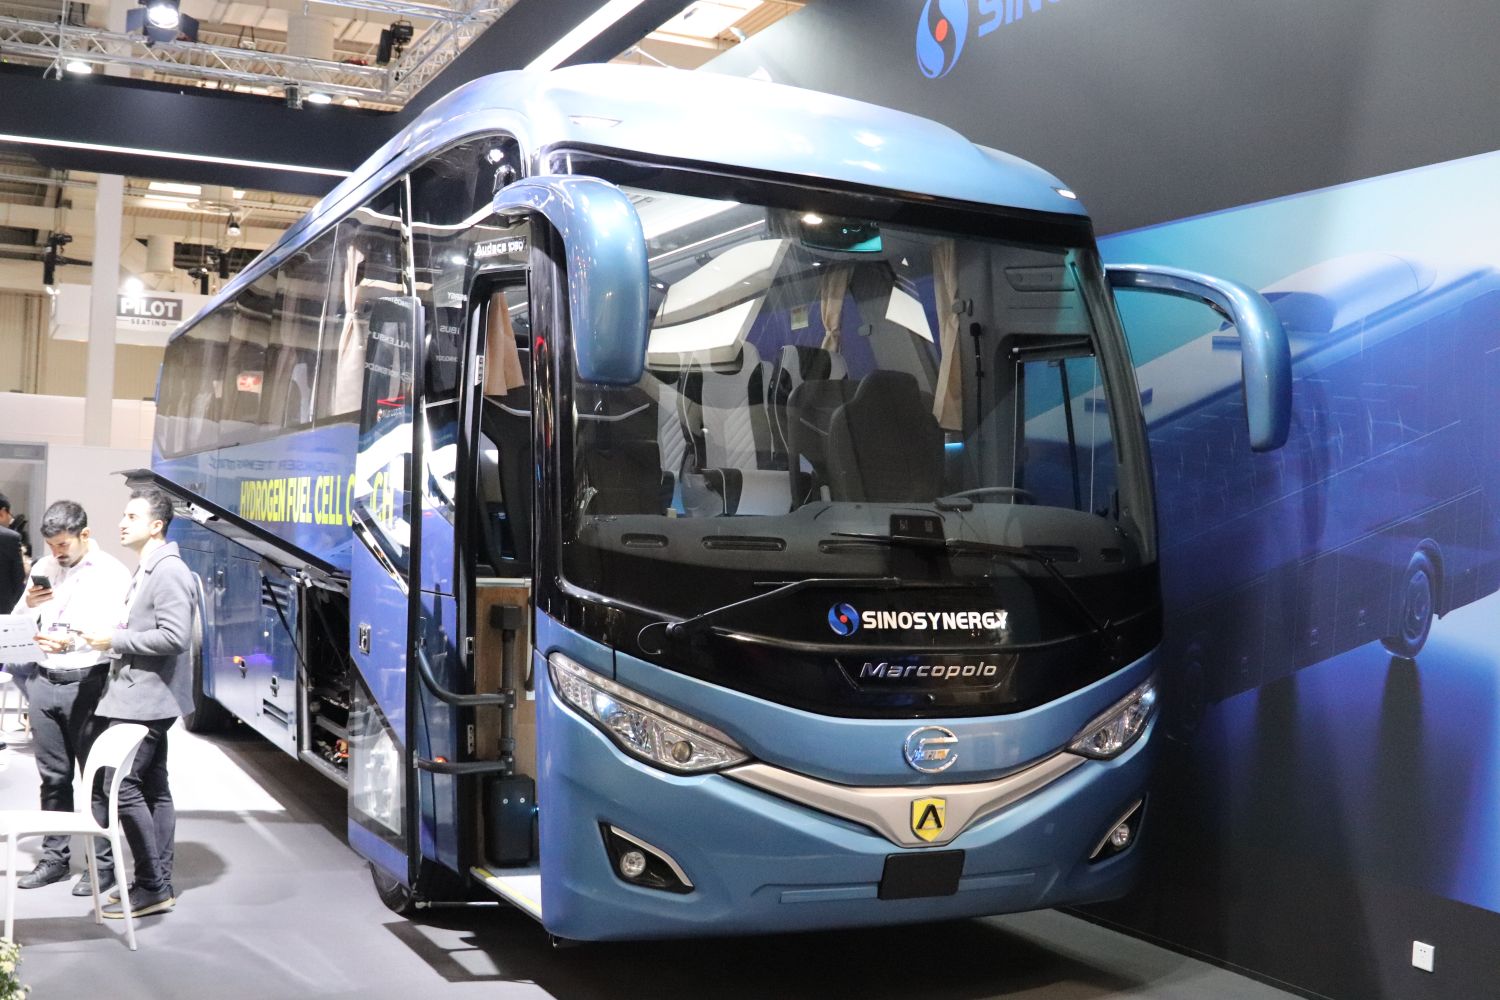 A joint venture between Sinosynergy, Allenbus and Feichi was this hydrogen fuelled coach with Marcopolo body